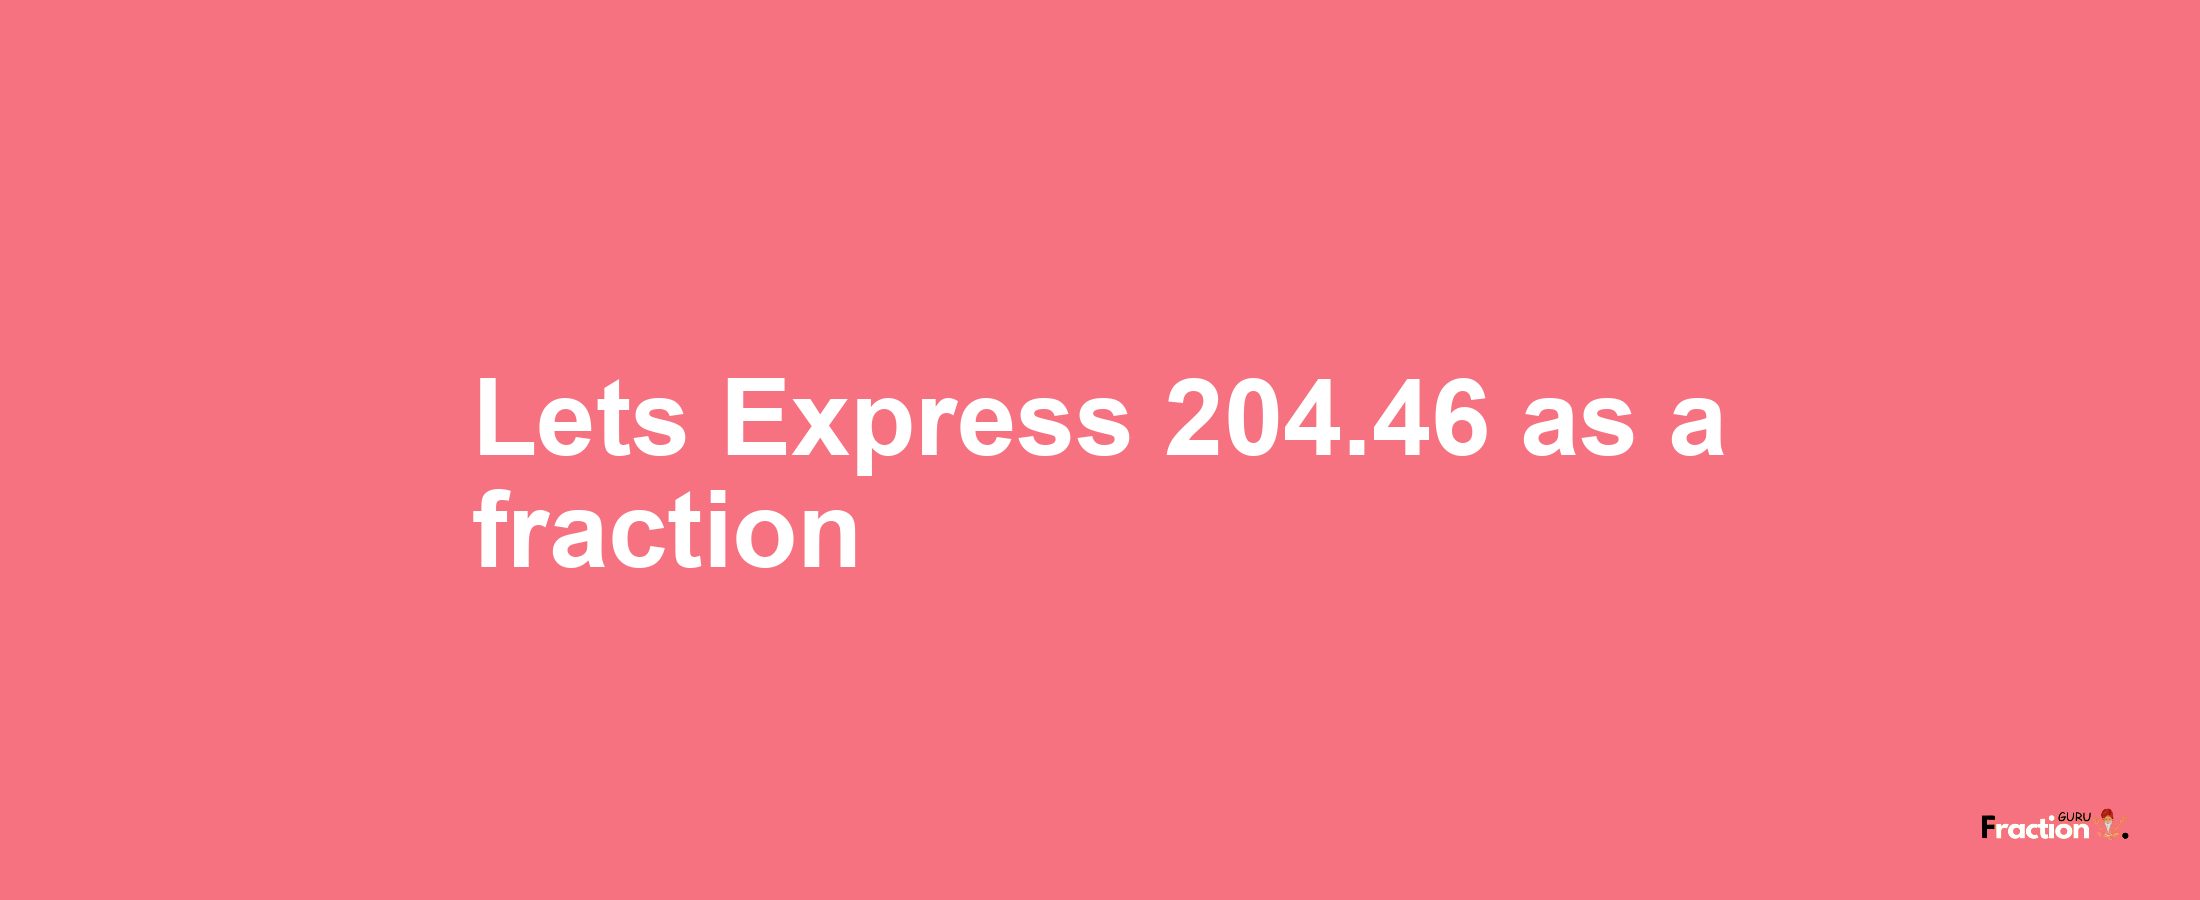 Lets Express 204.46 as afraction